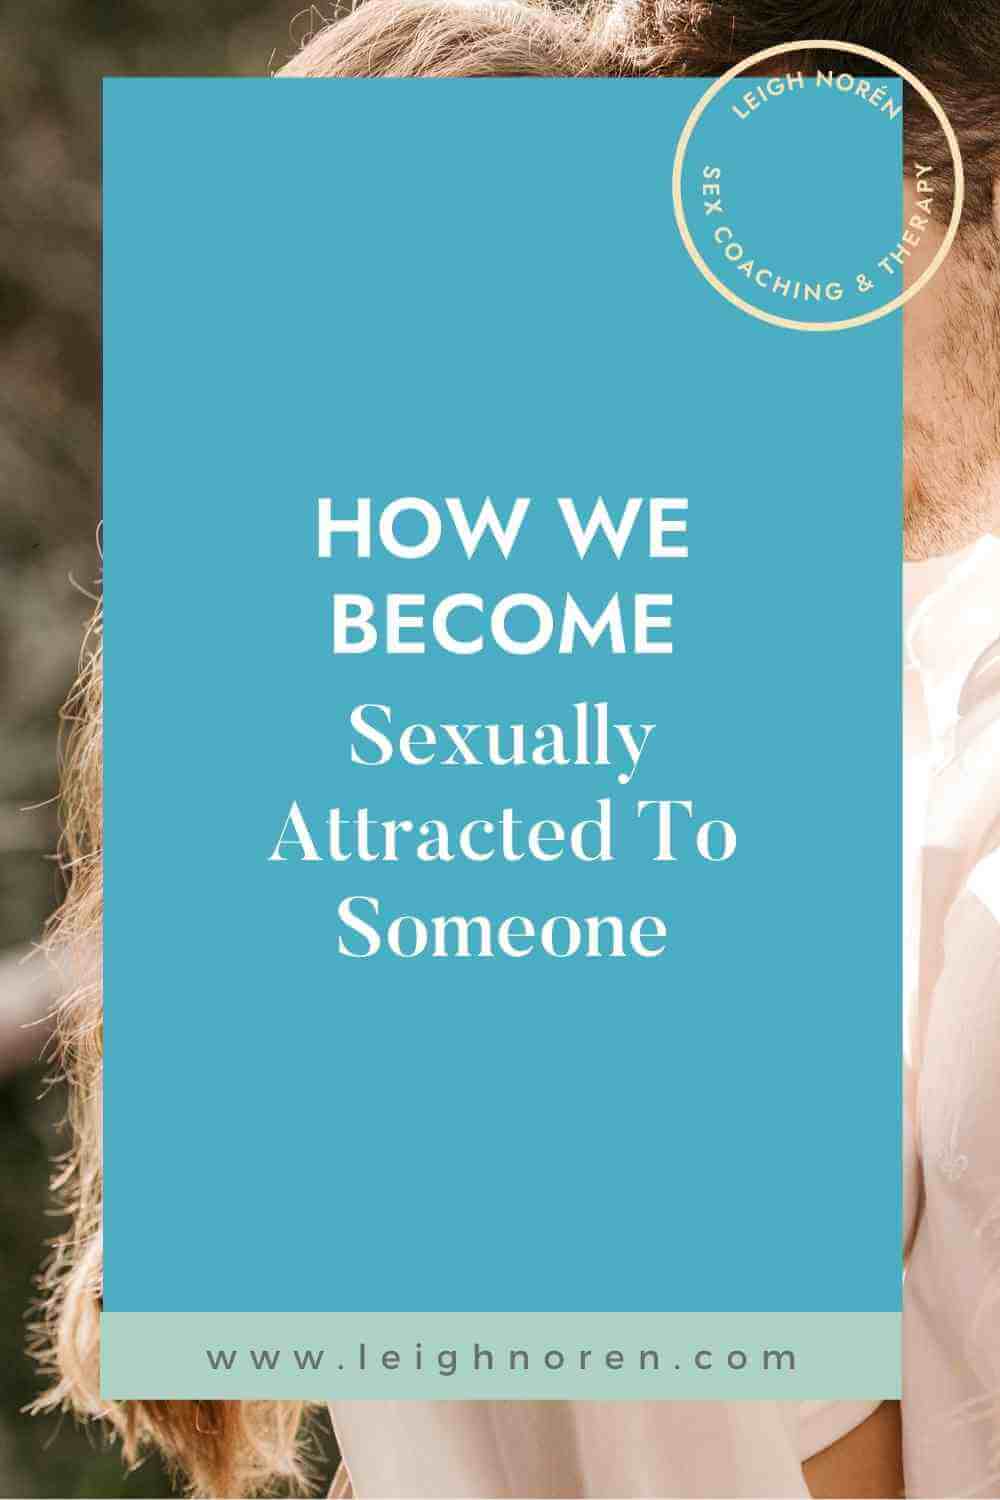 How We Become Sexually Attracted To Someone